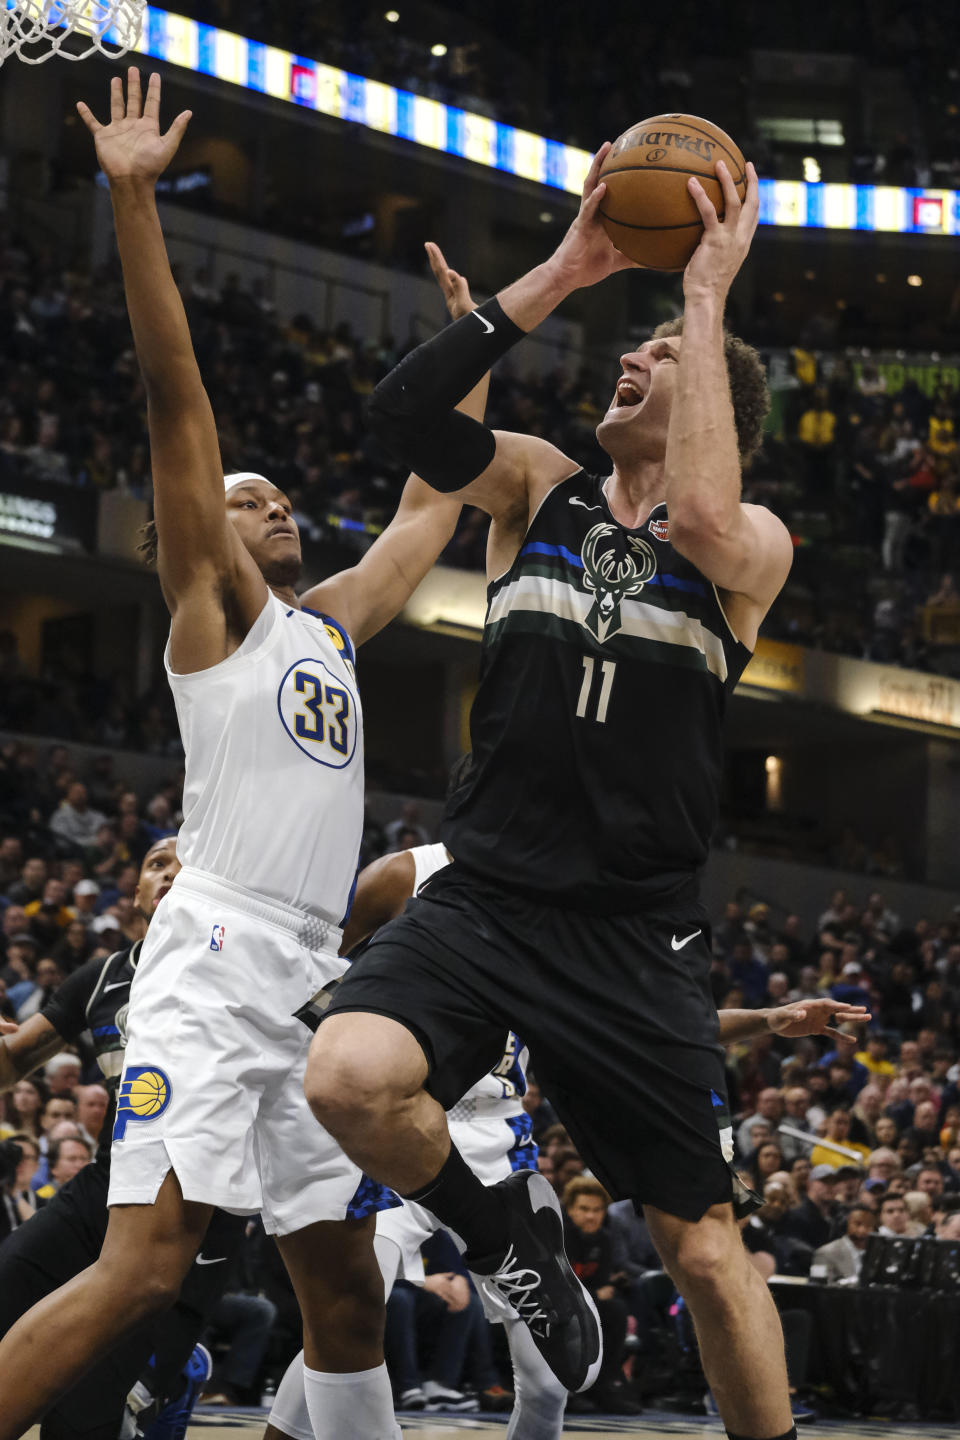 Milwaukee Bucks center Brook Lopez (11) shoots next to Indiana Pacers center Myles Turner (33) during the second half of an NBA basketball game in Indianapolis, Wednesday, Feb. 12, 2020. The Pacers won 118-111. (AP Photo/AJ Mast)